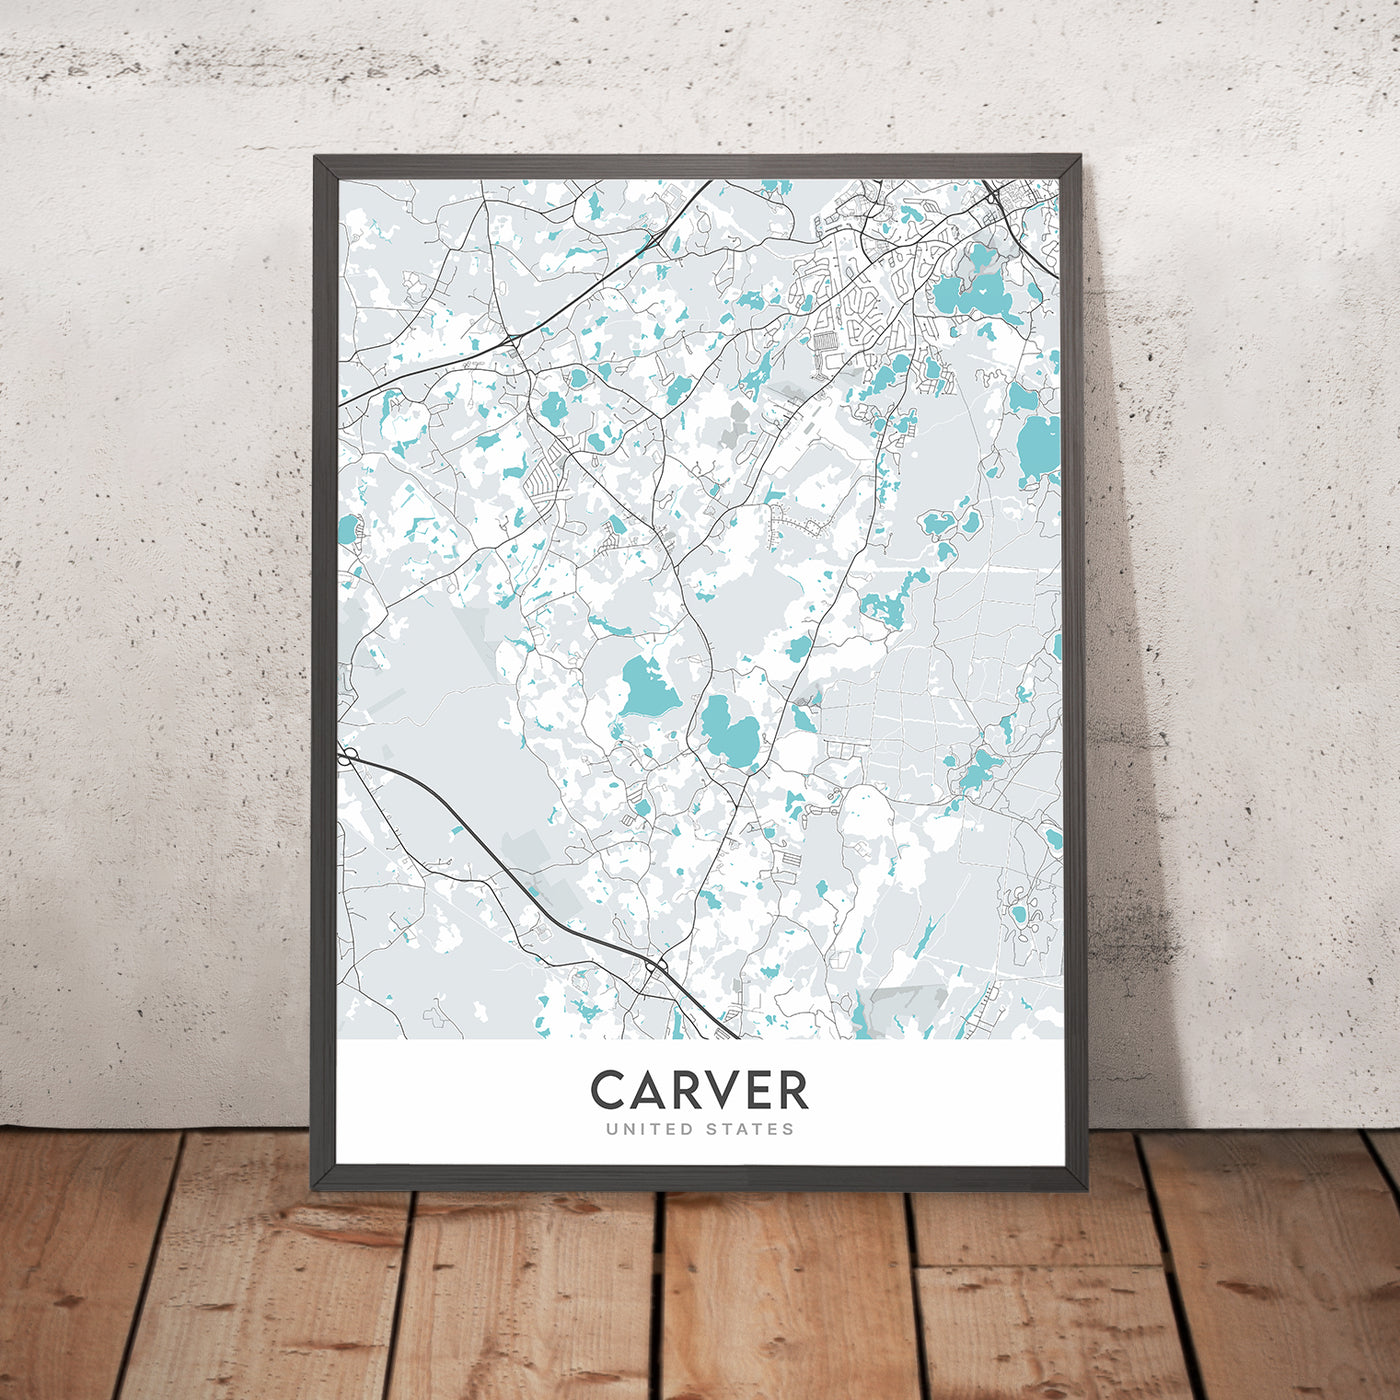 Modern City Map of Carver, MA: Carver Center, Carver Town Hall, MA-58, MA-36, County Road